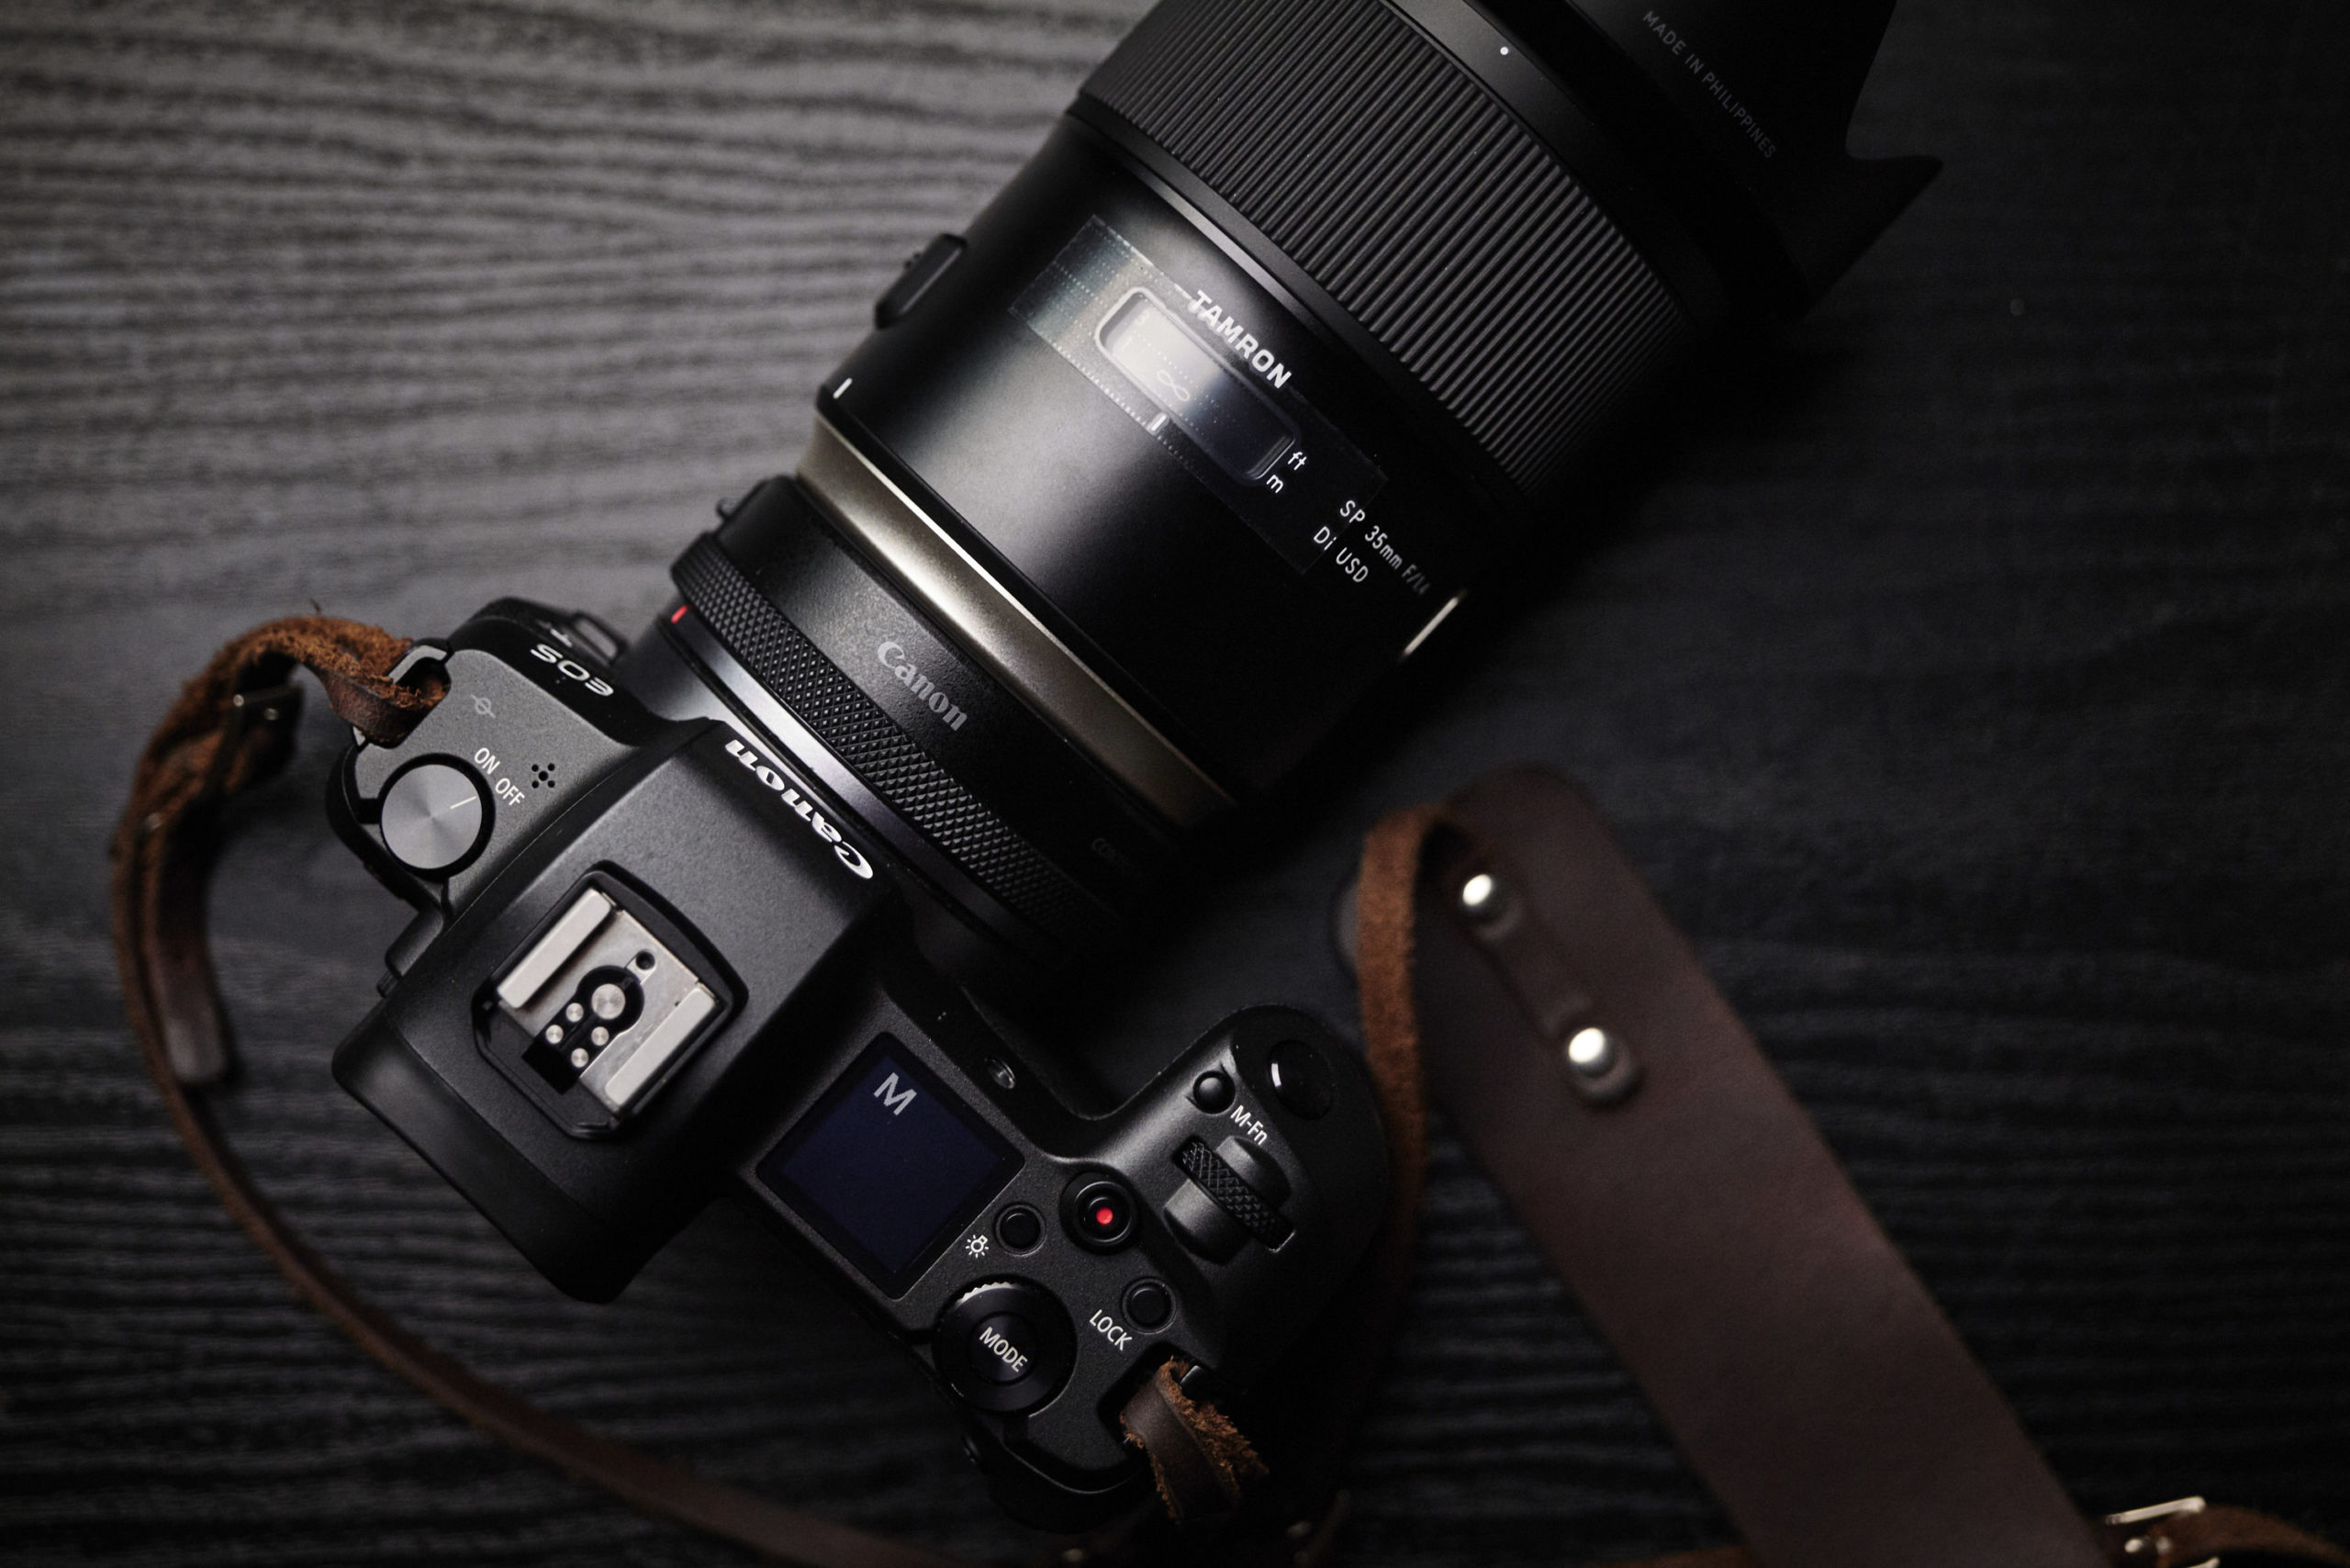 Chris Gampat The Phoblographer Tamron 35mm f1.4 Di USD product images review